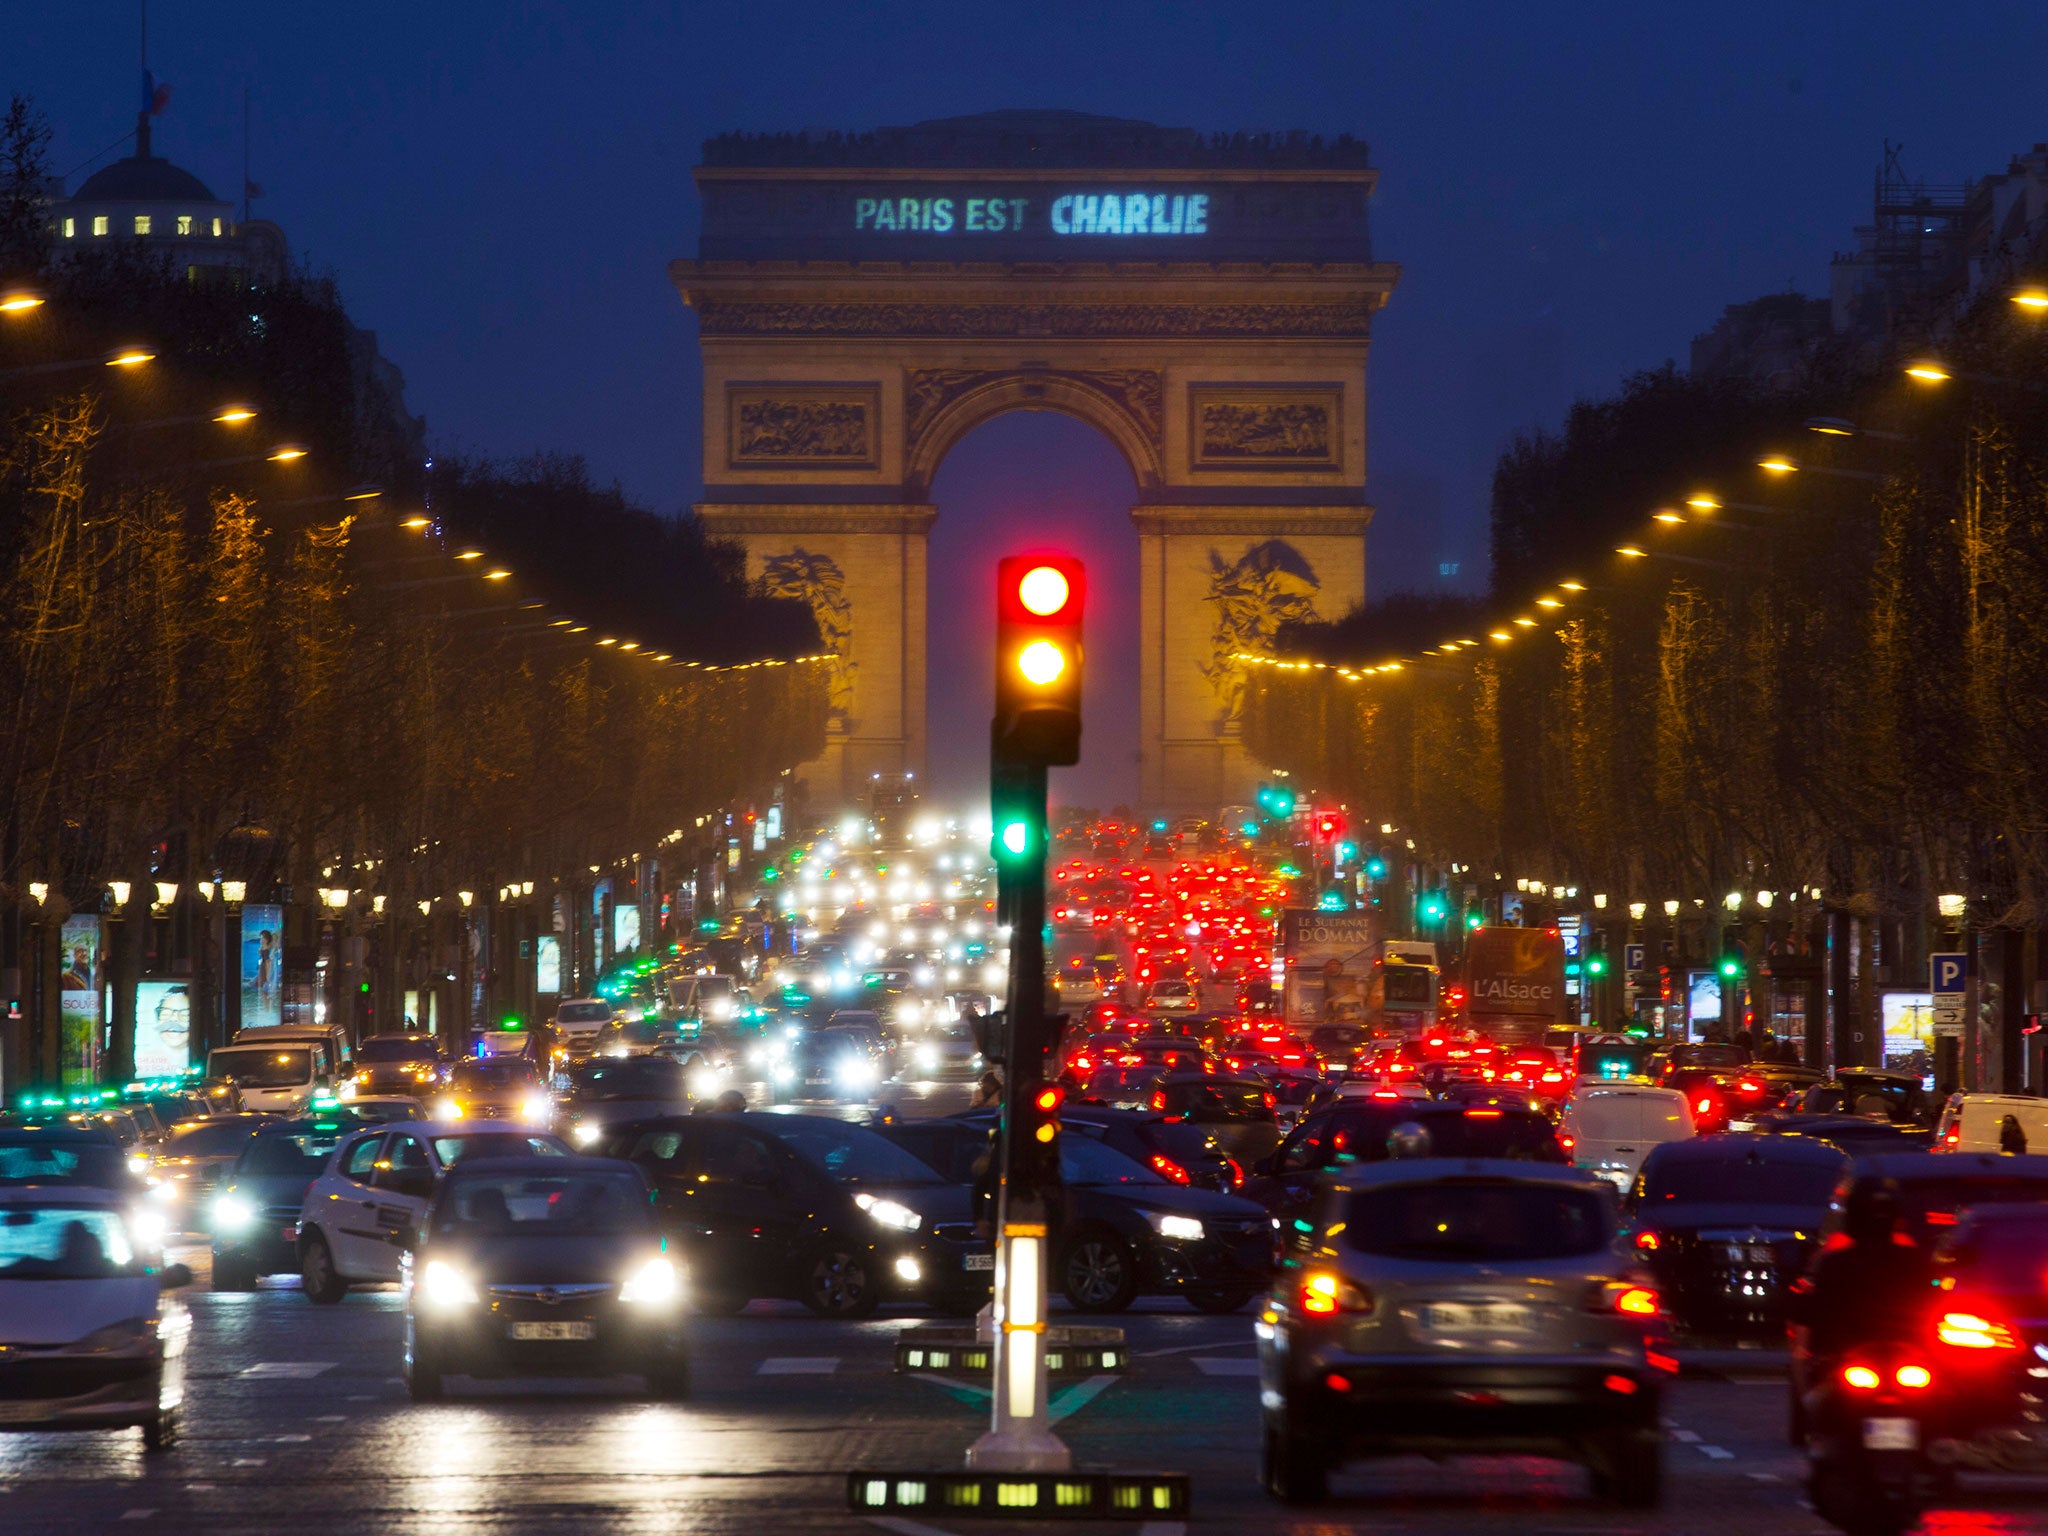 A sign on the Arc de Triomphe reads "Paris is Charlie" in solidarity with the victims of the shooting at the satirical newspaper Charlie Hebdo in Paris